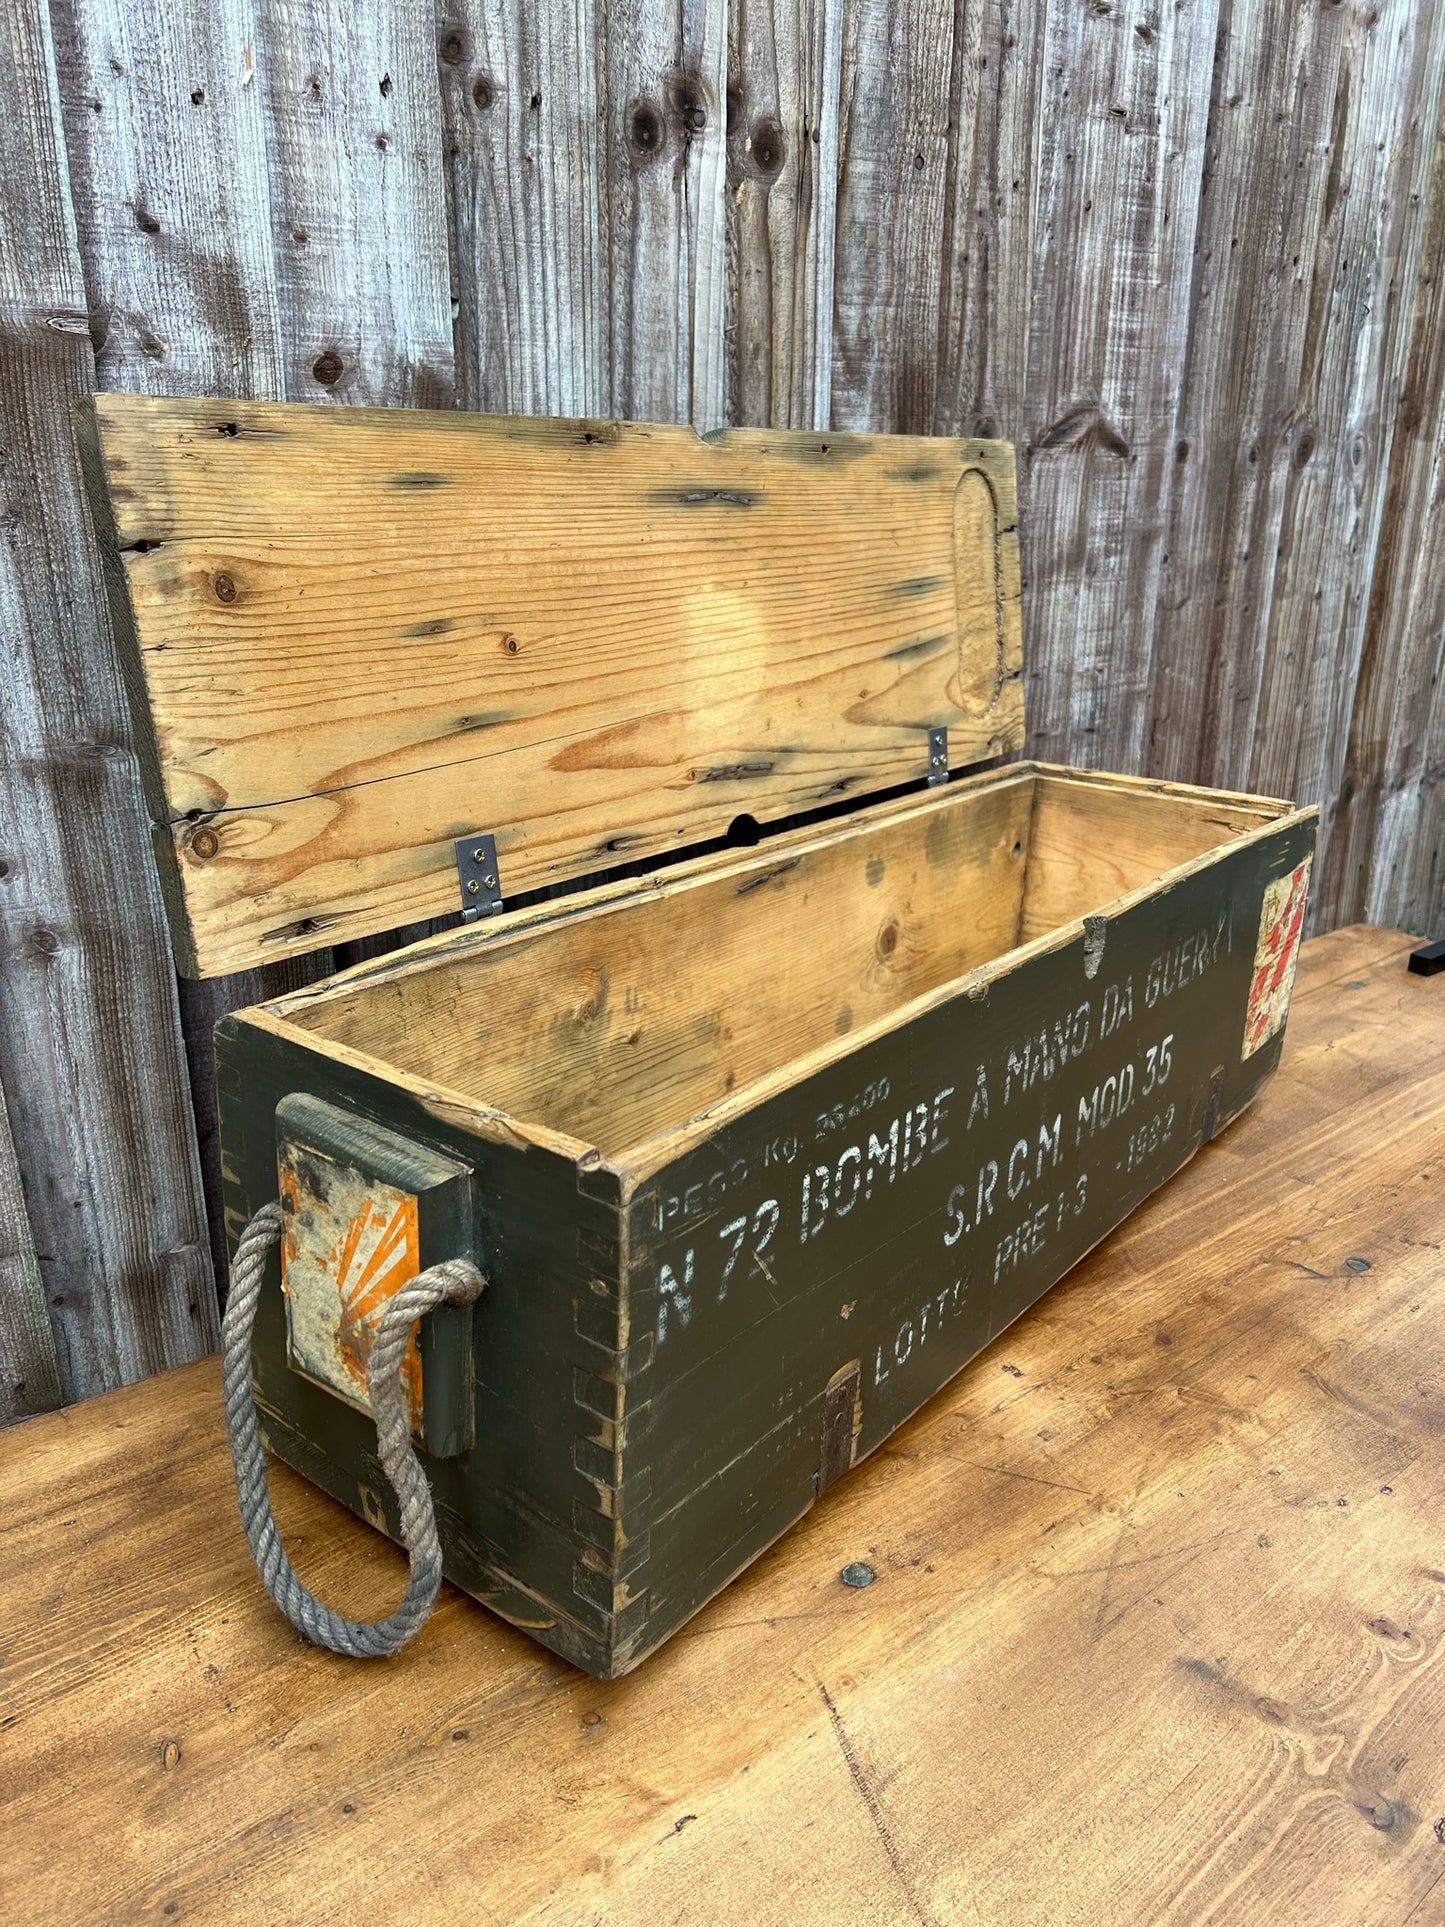 Vintage Rustic Storage Chest 1982 Ammo Box Wooden Industrial Trunk Home Coffee Table